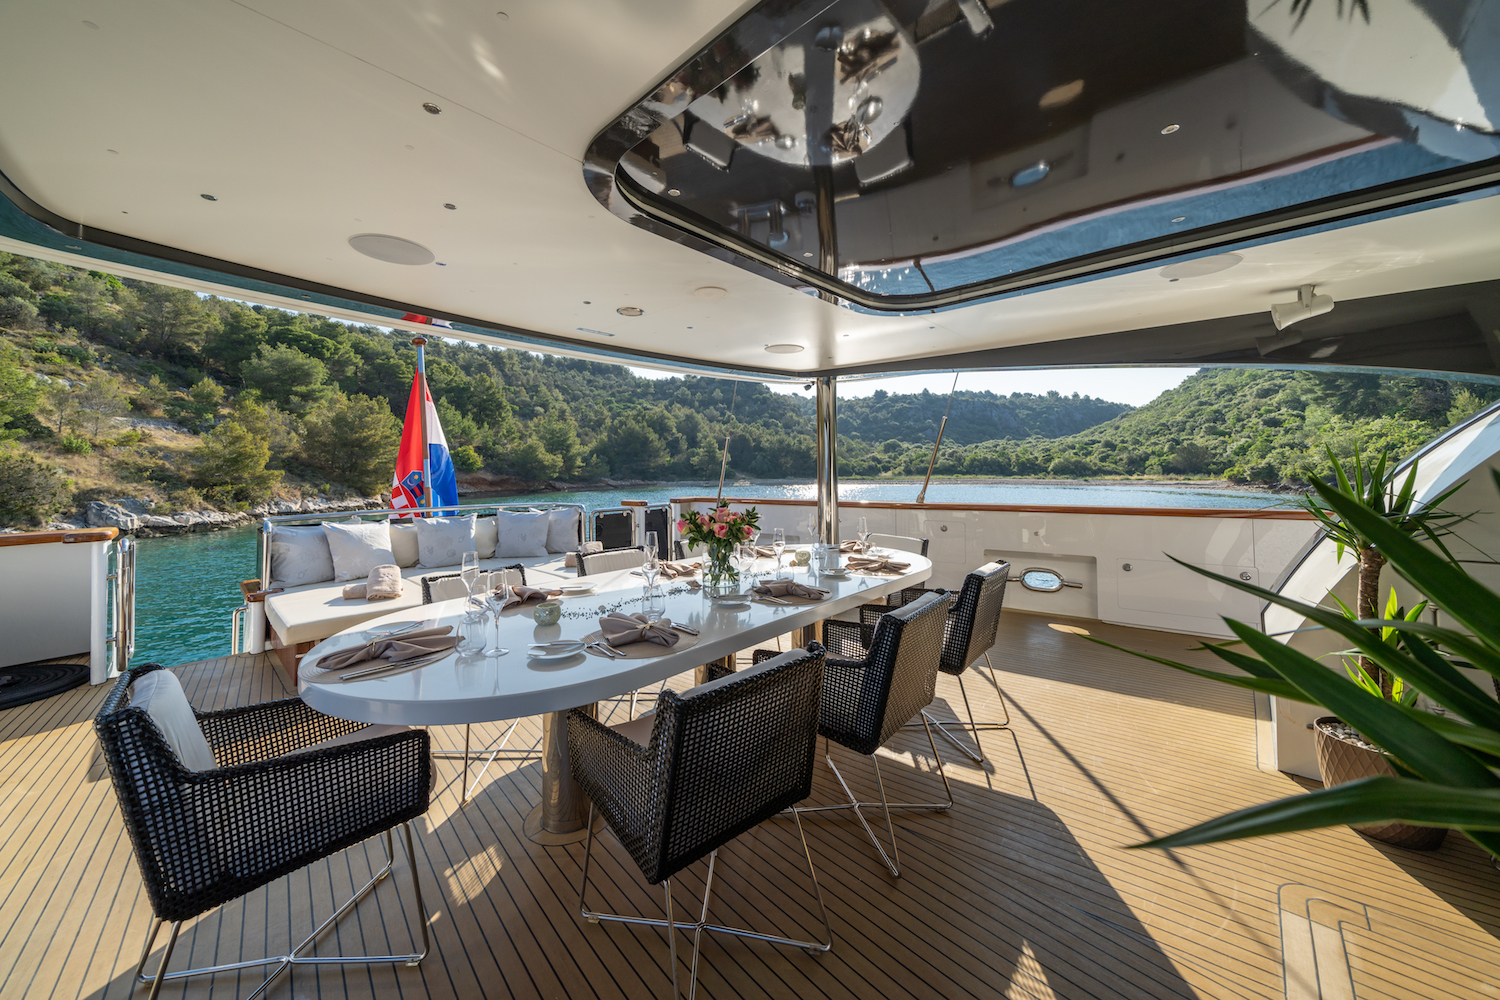 Beautiful aft deck with amazing views of the Croatian nature